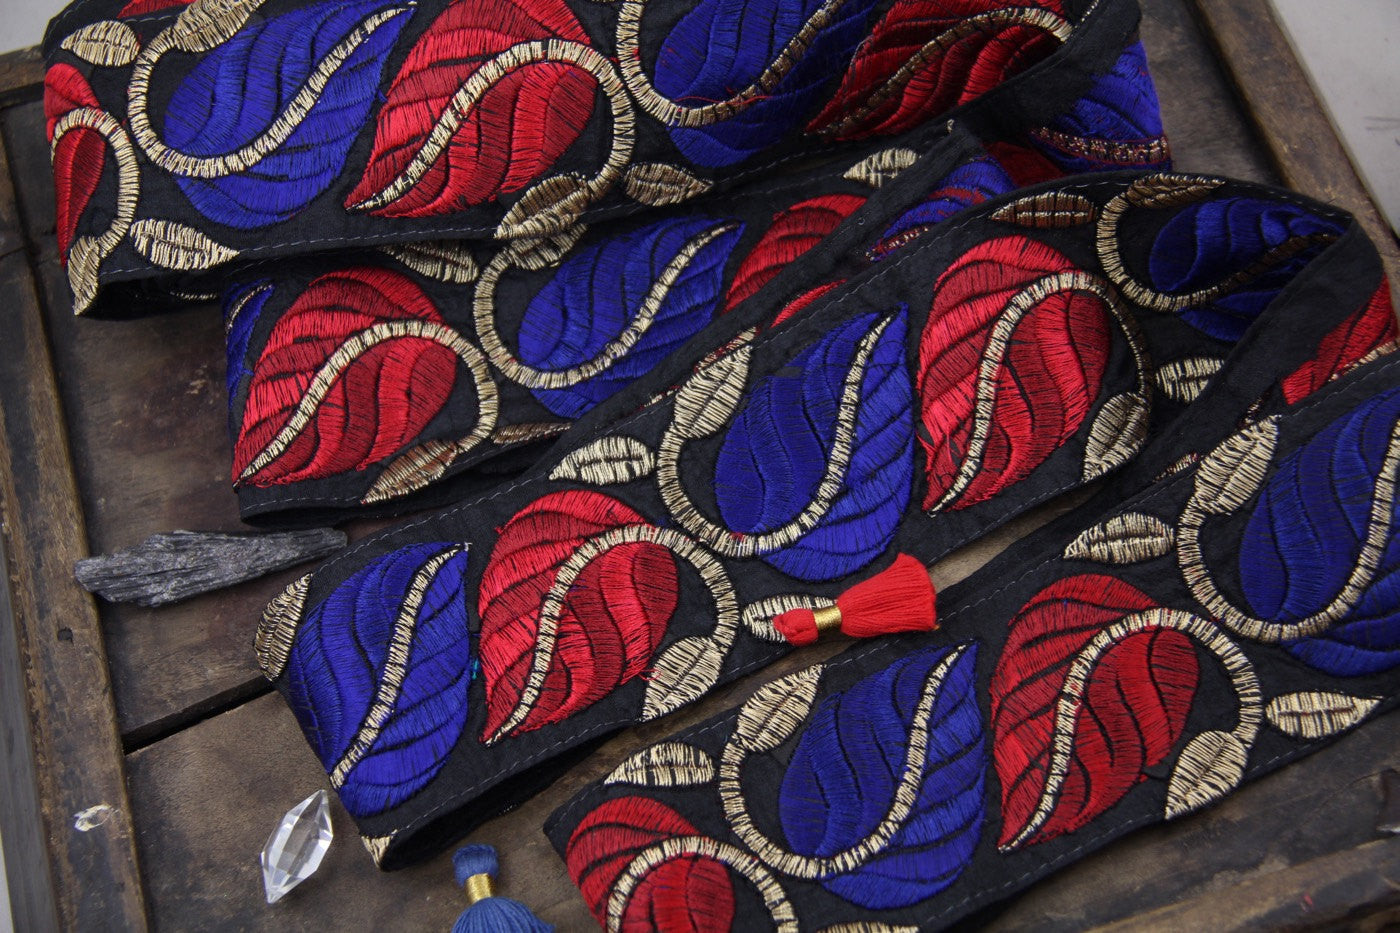 Regal Vines at Midnight: Black with Red, Blue, Gold leaves, Sari Border from India 2 1/2" x 1 yard, Ornate Winter Sewing Decorating Supply - ShopWomanShopsWorld.com. Bone Beads, Tassels, Pom Poms, African Beads.